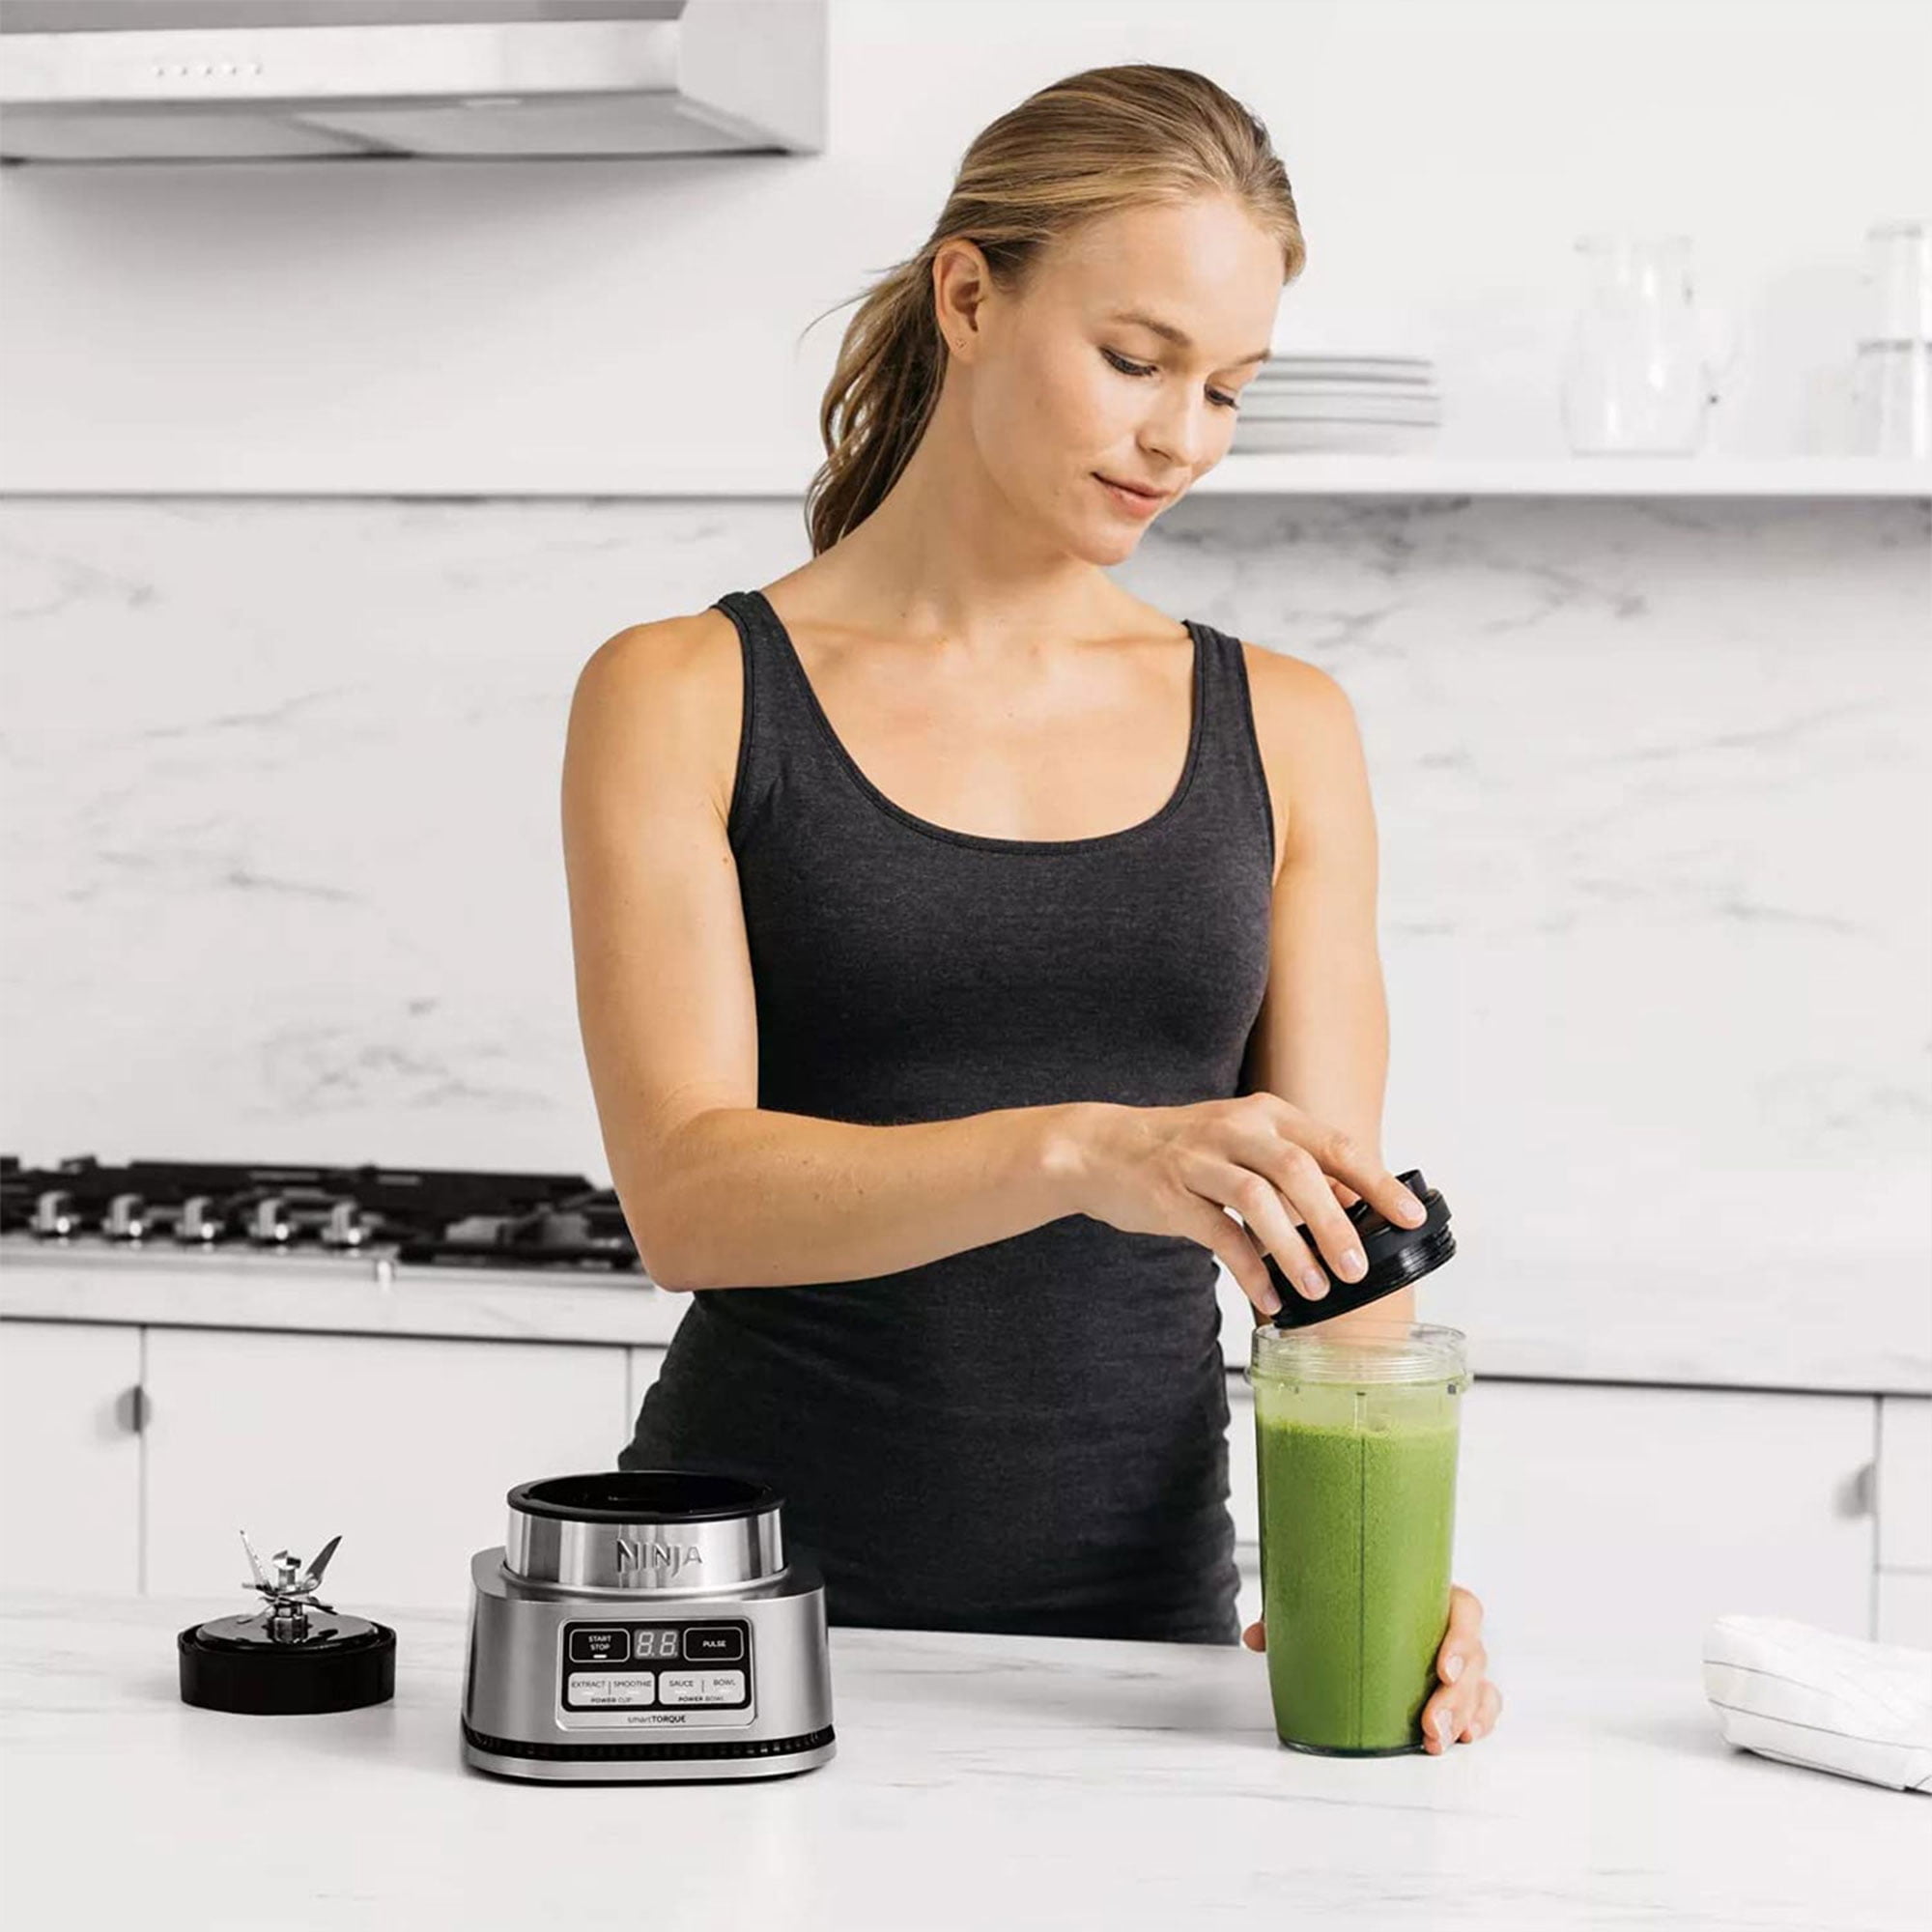 Ninja Foodi Smoothie Bowl Maker for $74 or 11-piece Magic Bullet now just  $18 (Reg. up to $99)